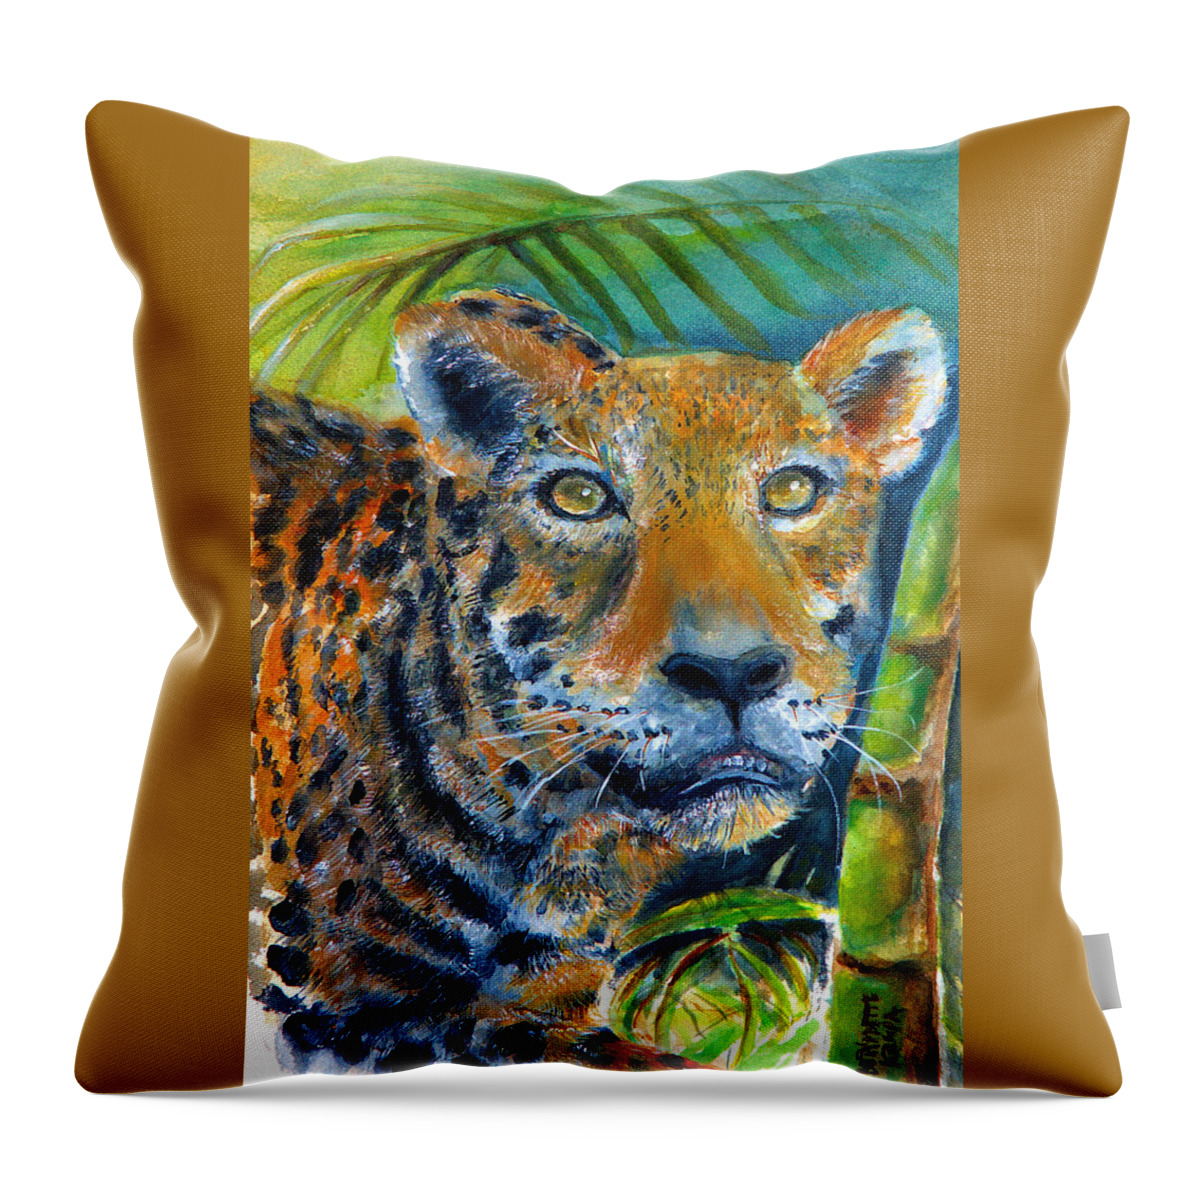 Jaquar Throw Pillow featuring the painting Jaquar On The Prowl by Bernadette Krupa